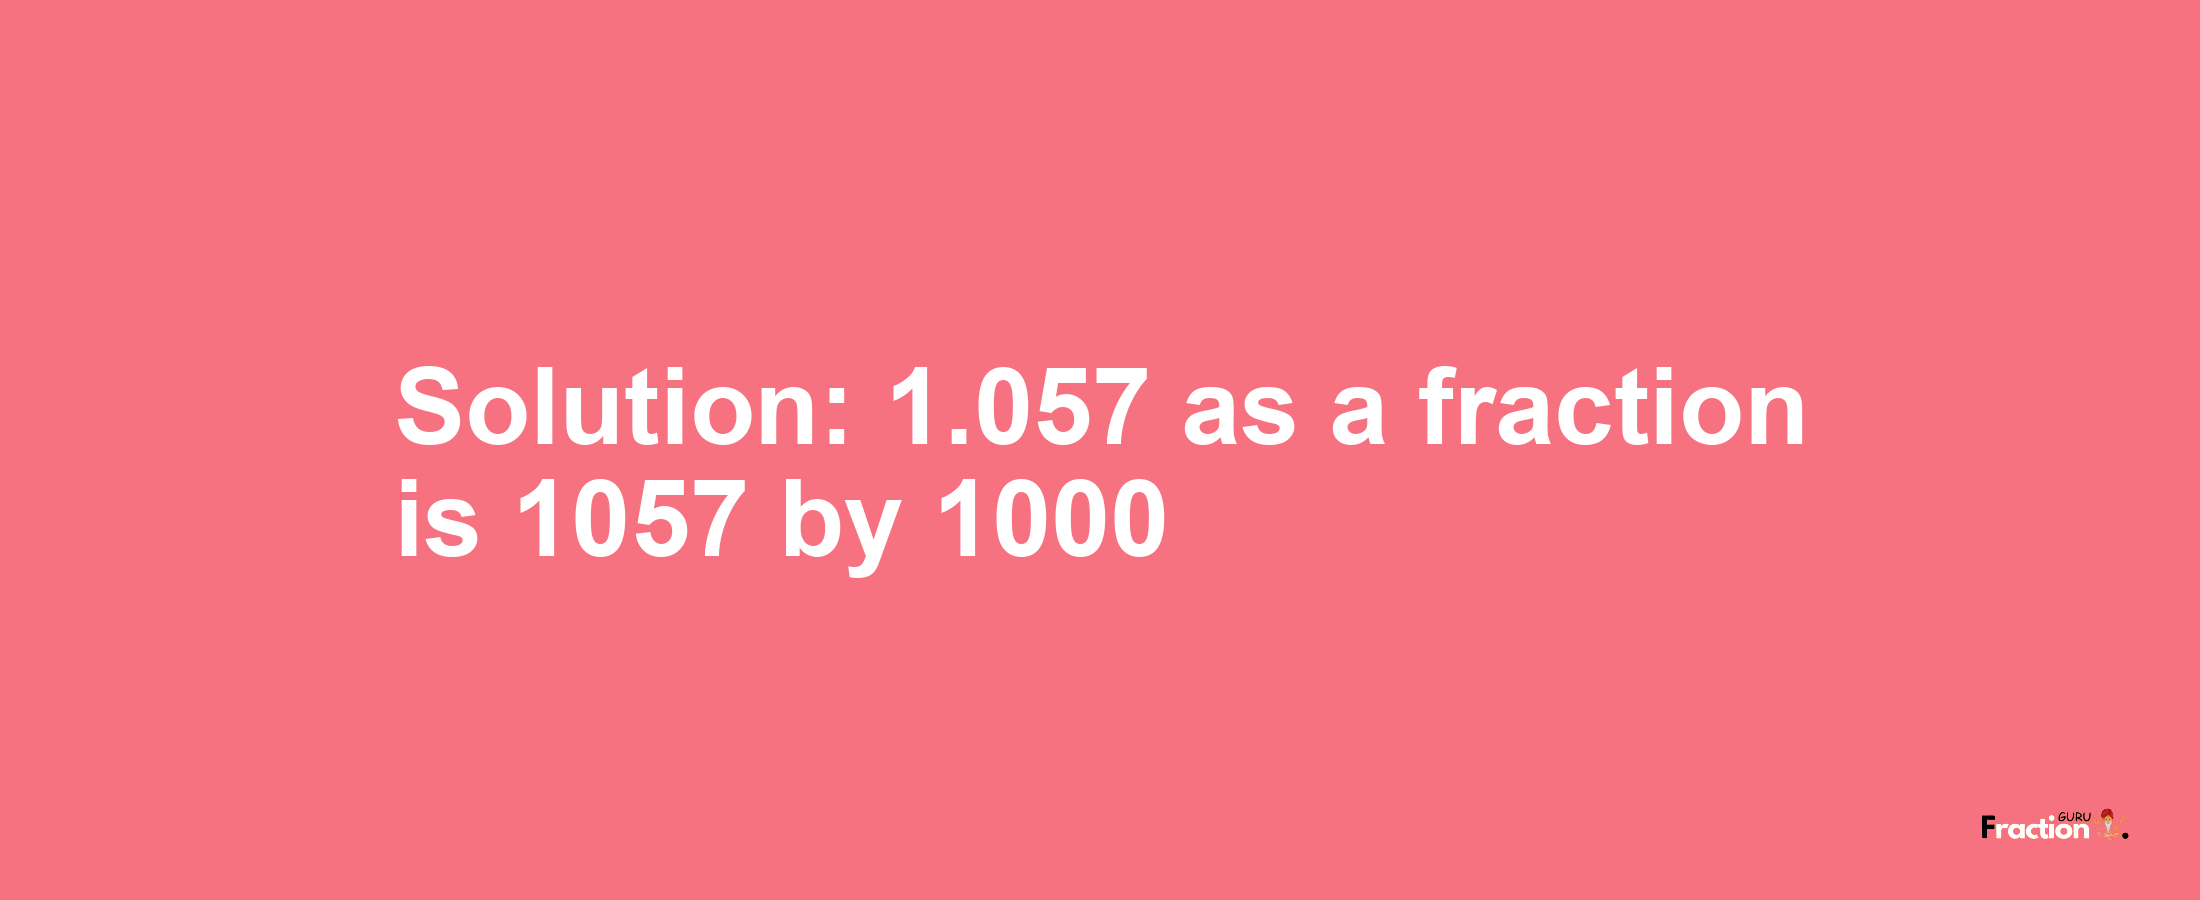 Solution:1.057 as a fraction is 1057/1000